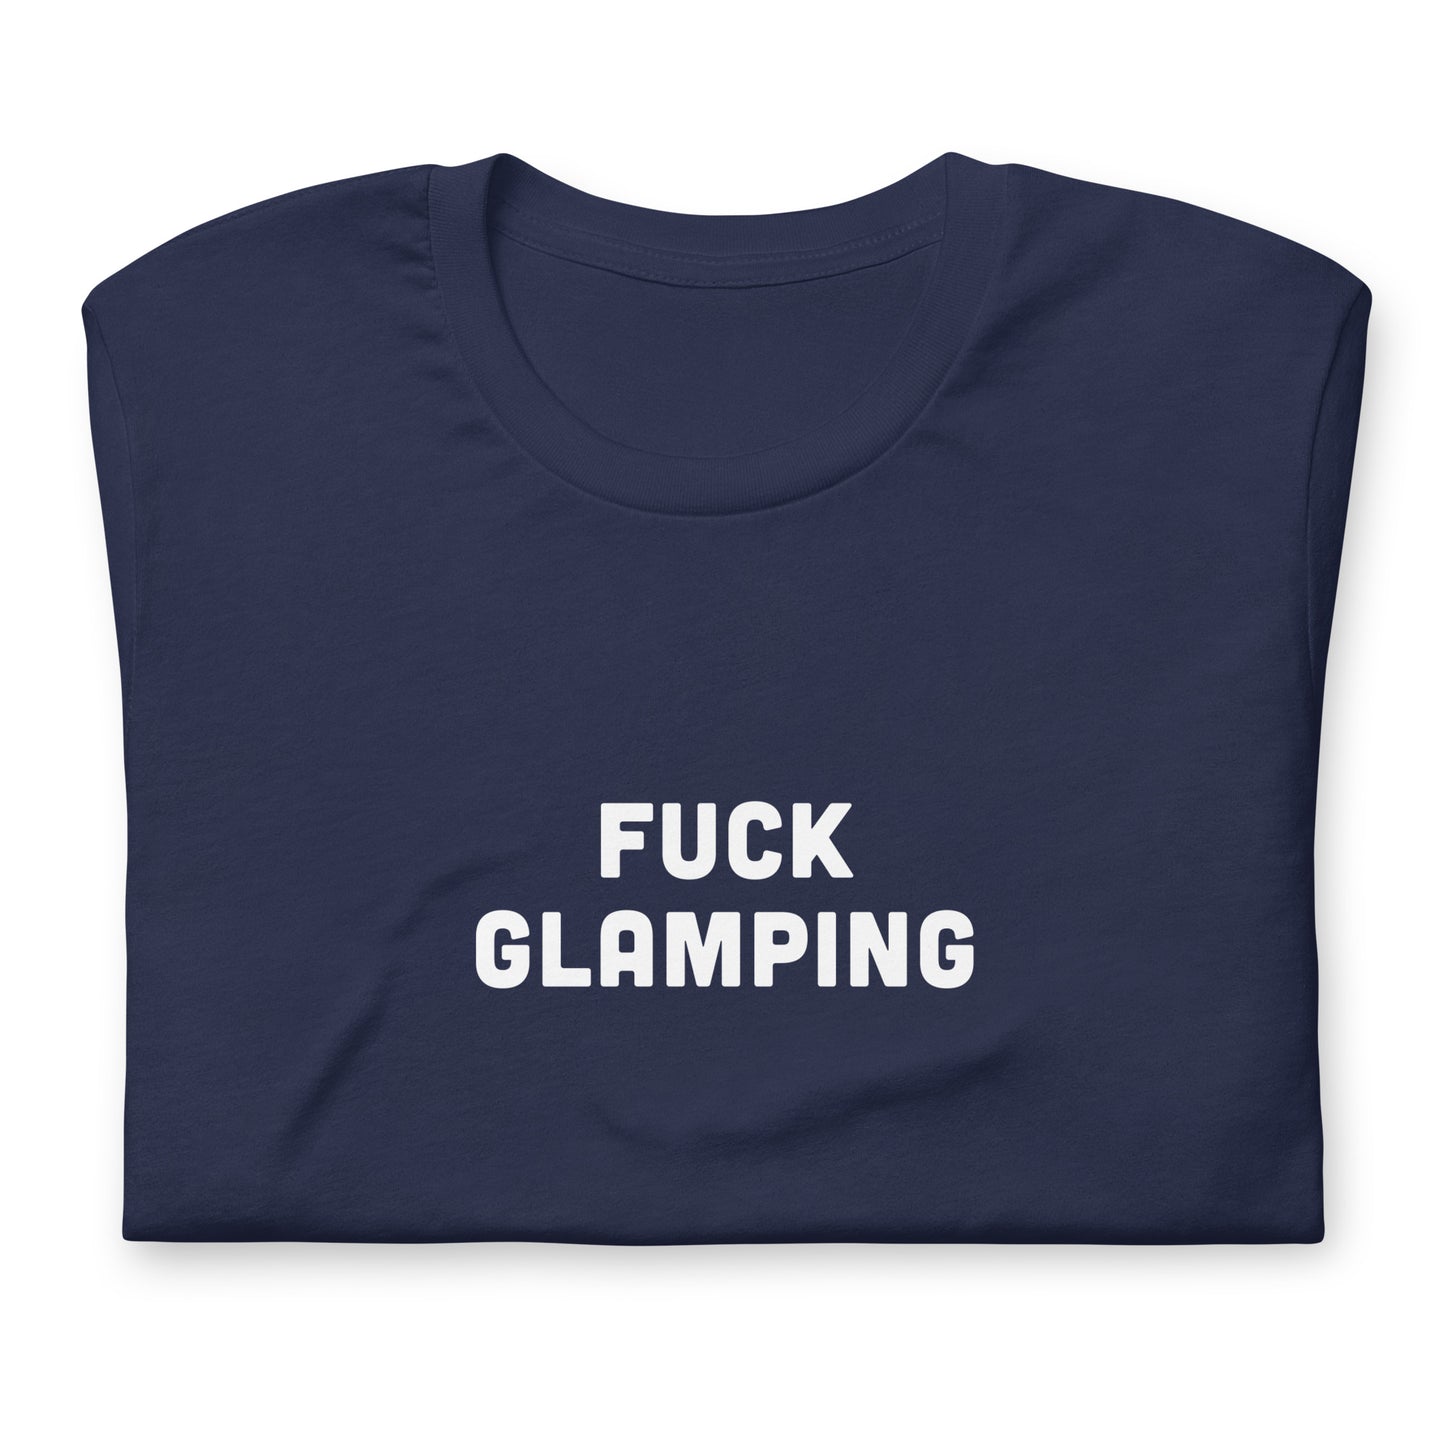 Fuck Glamping T-Shirt Size XL Color Black